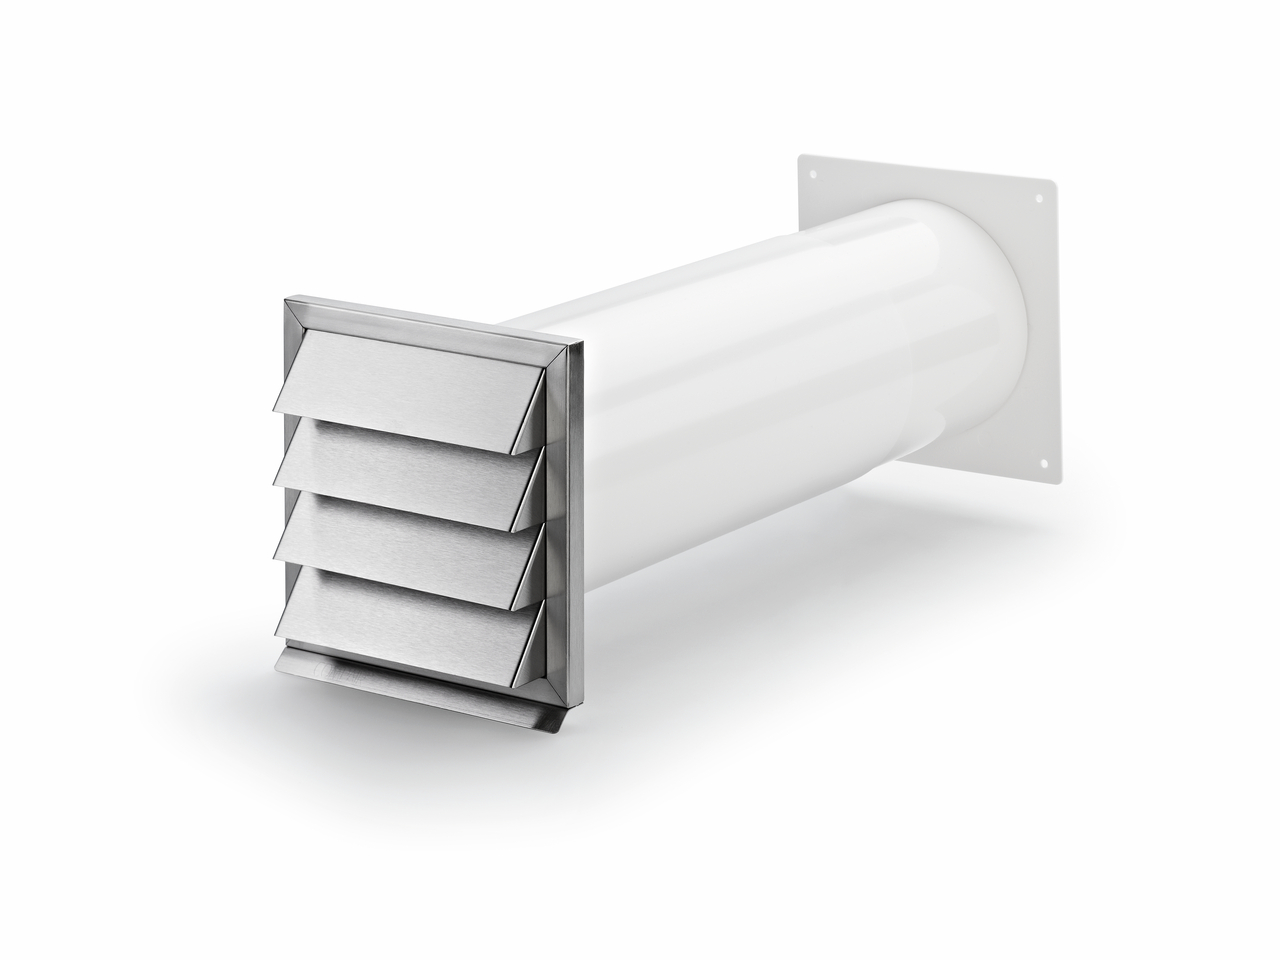  Klima-E 150 wall conduct, white, stainless steel